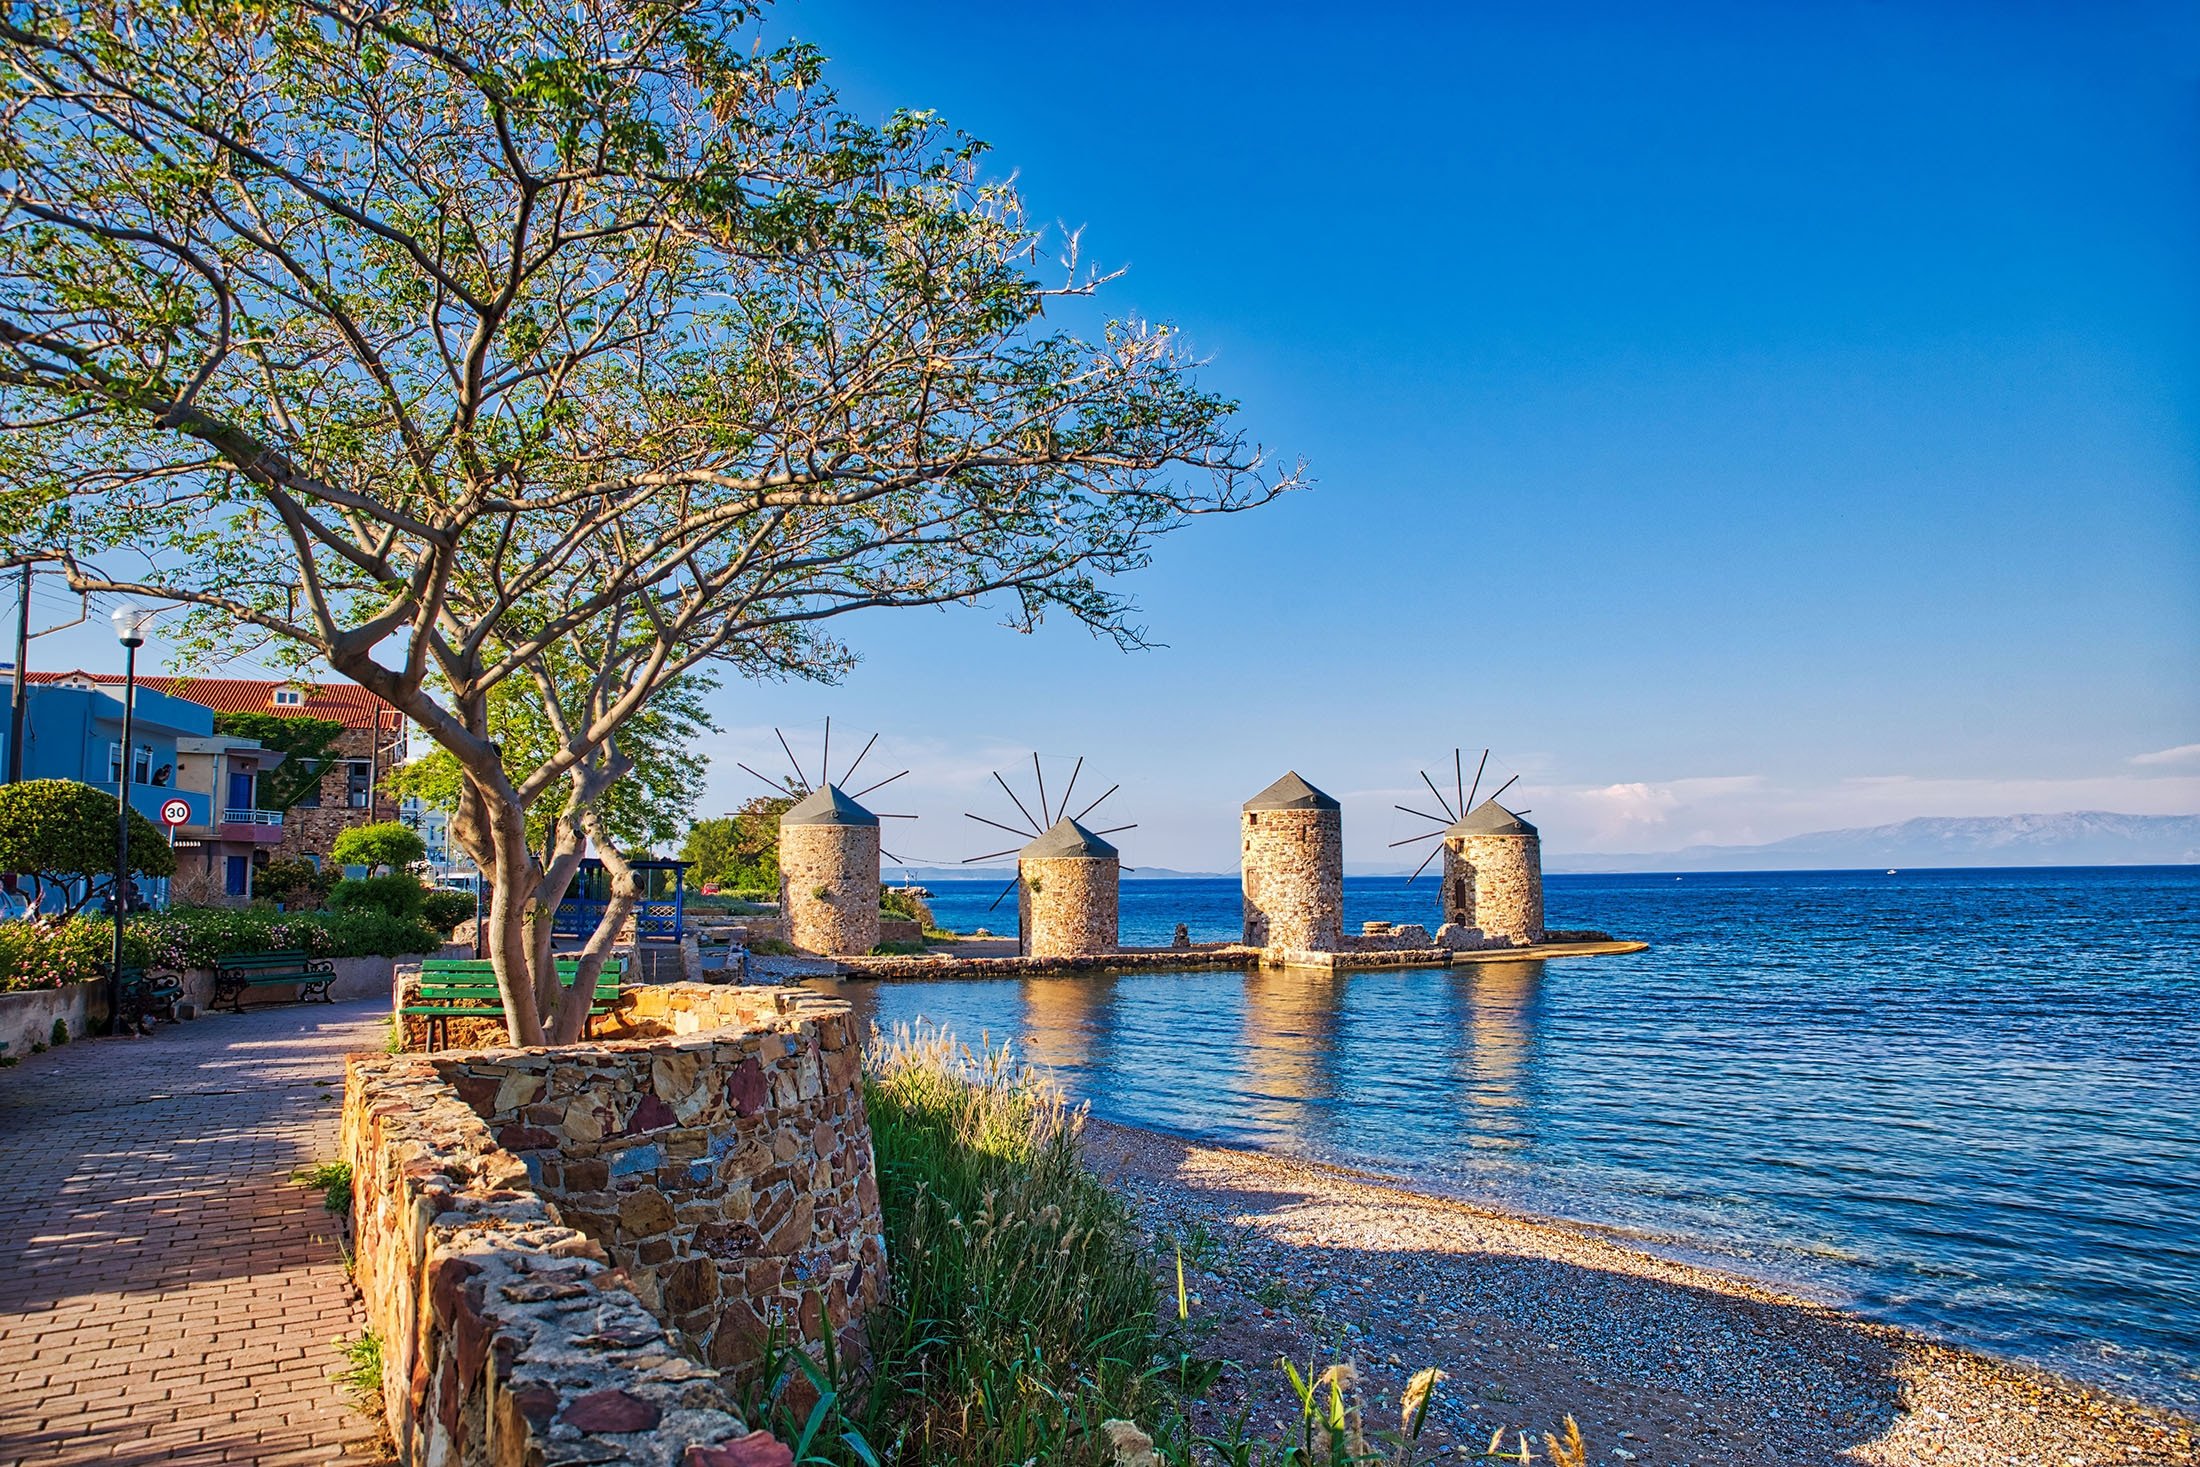 Chios is just across the water from Türkiye's Çeşme with a 30-minute ferry ride. (Shutterstock Photo)